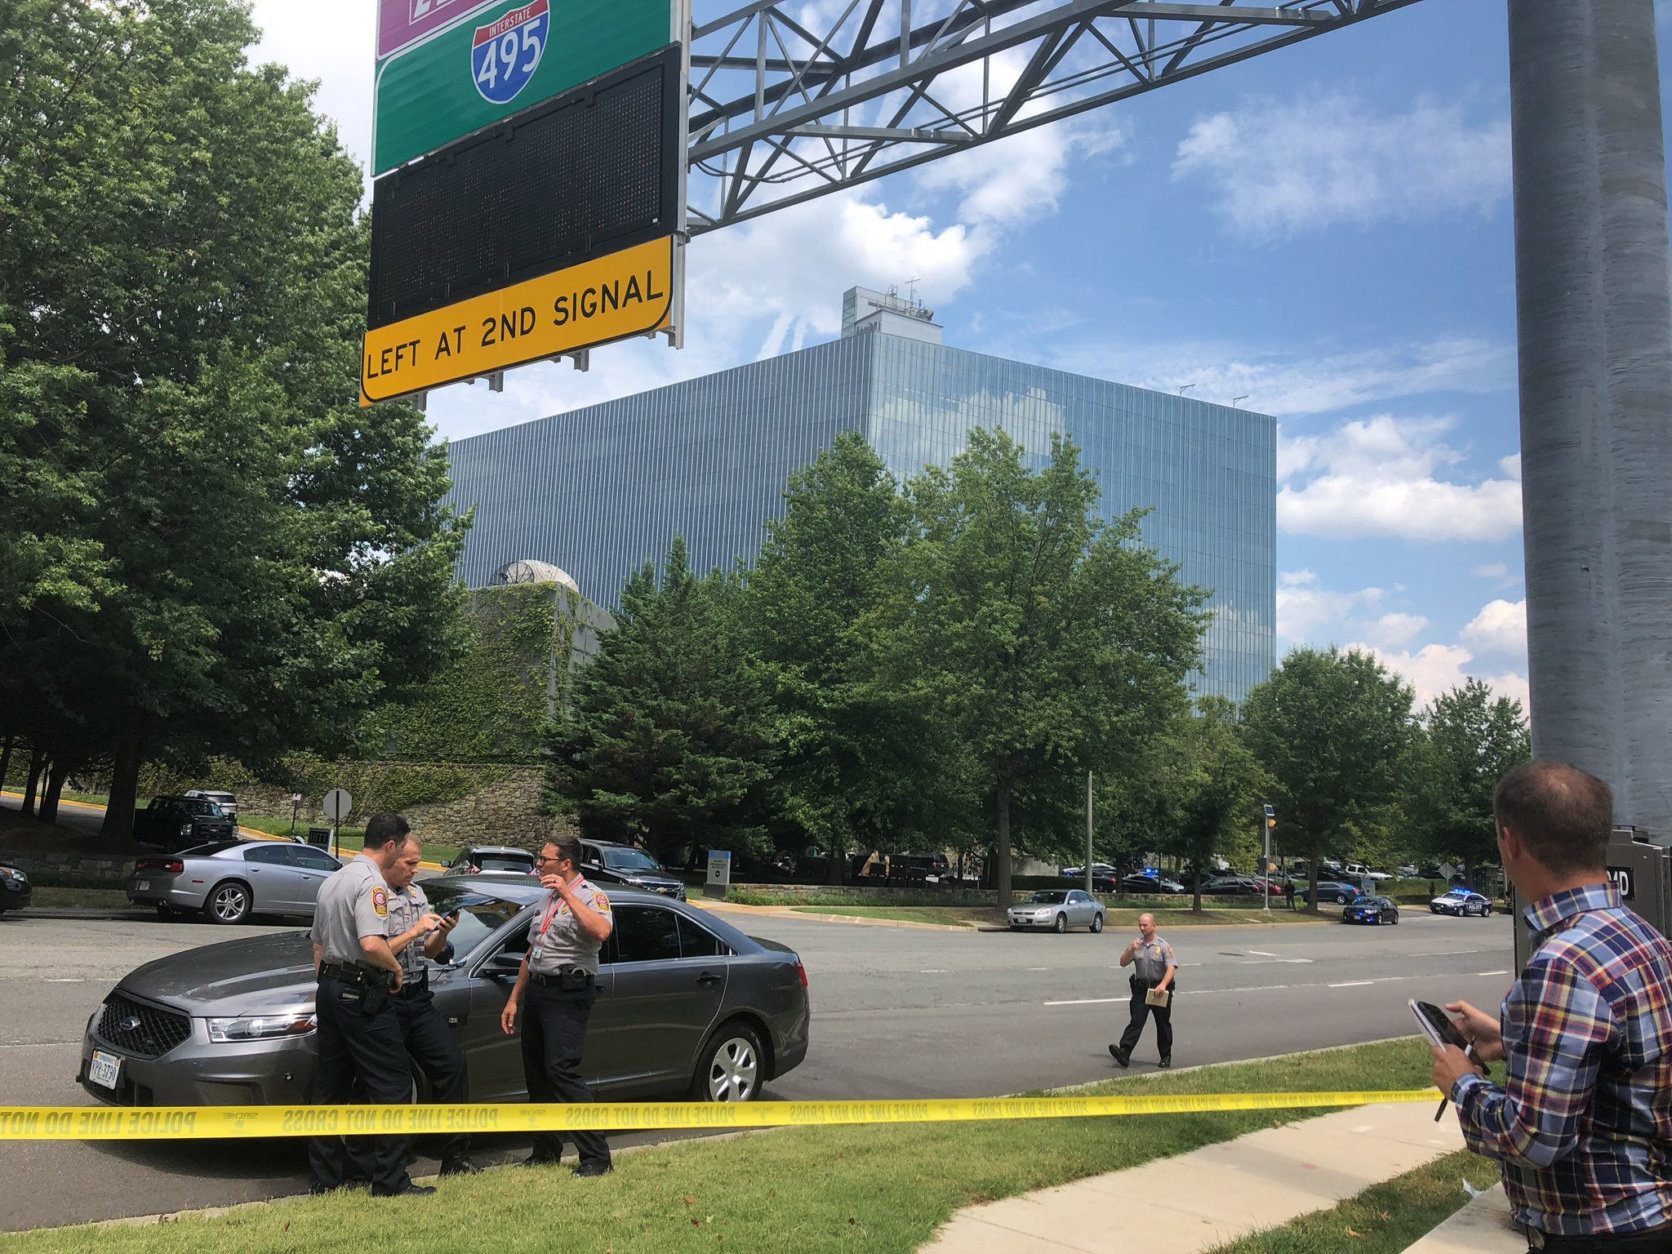 Police investigating reports of an armed man near the Gannett building in McLean, Virginia. (WTOP/Max Smith)